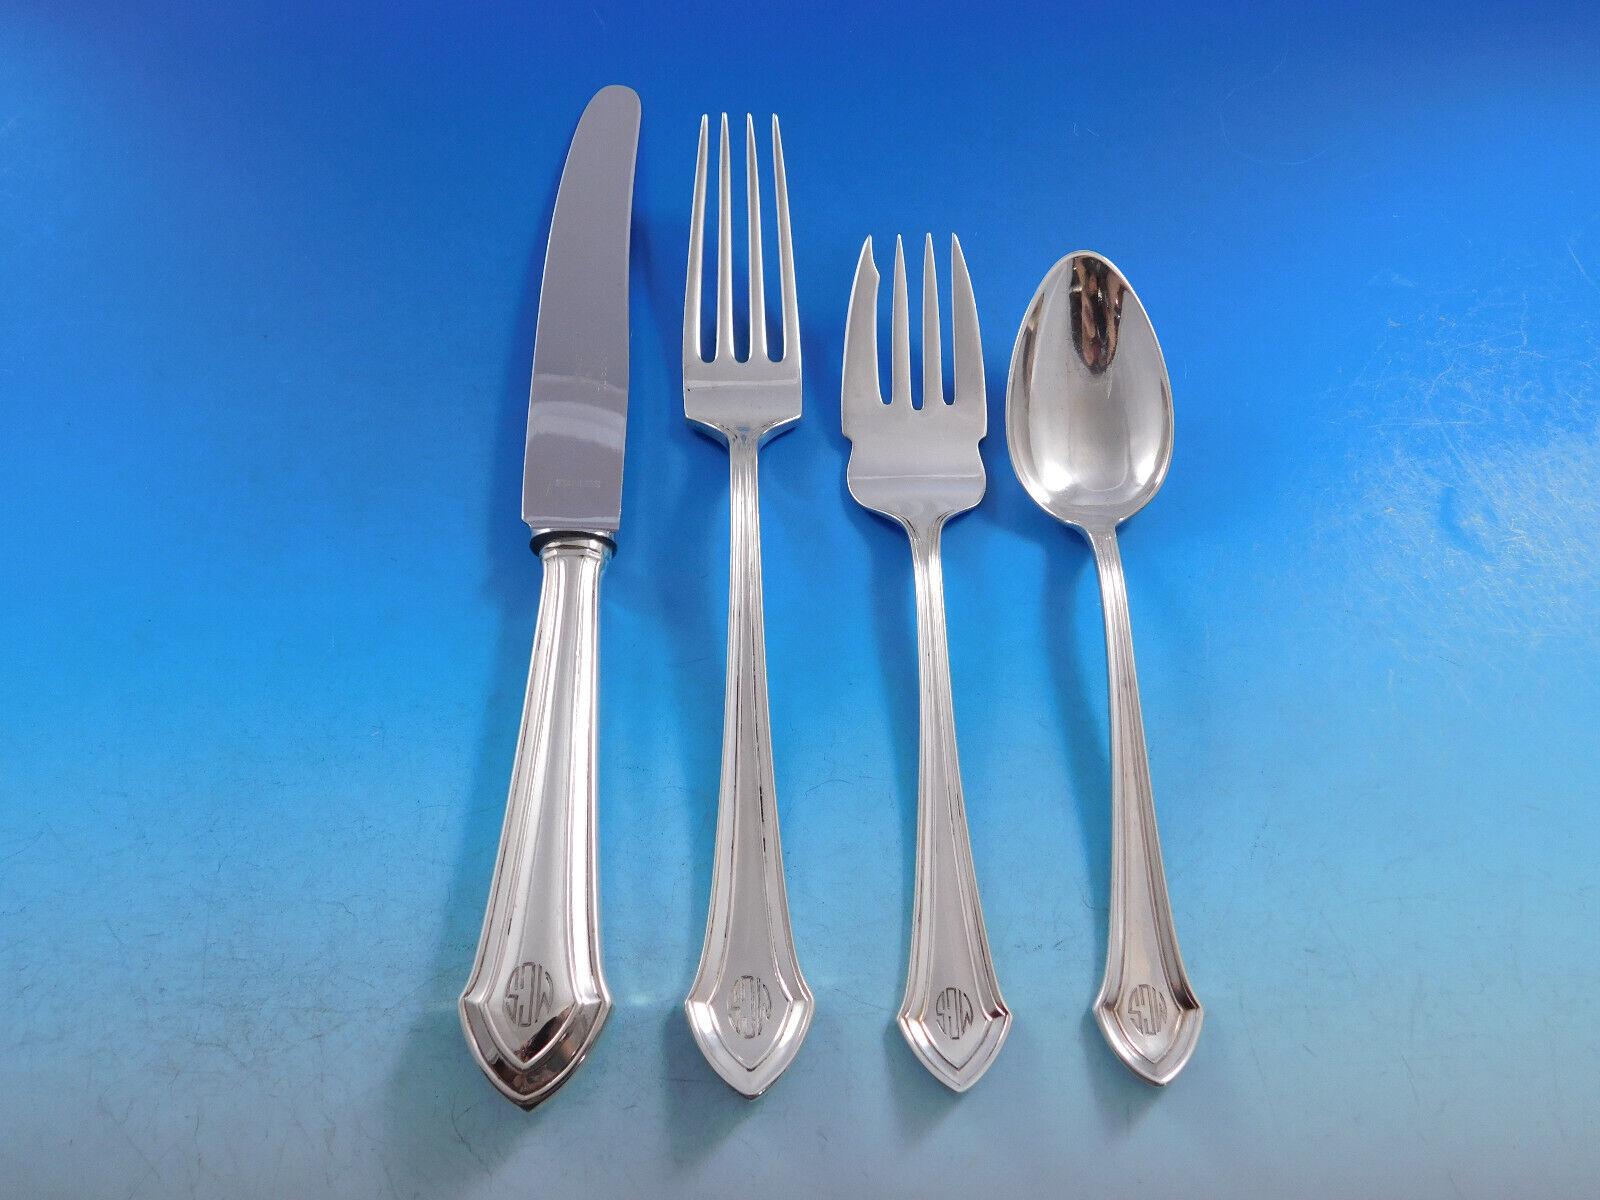 Large Dinner & Luncheon Essex by Durgin, c1911, sterling silver Flatware set - 112 pieces. This set includes:

12 Dinner Size Knives, 9 5/8